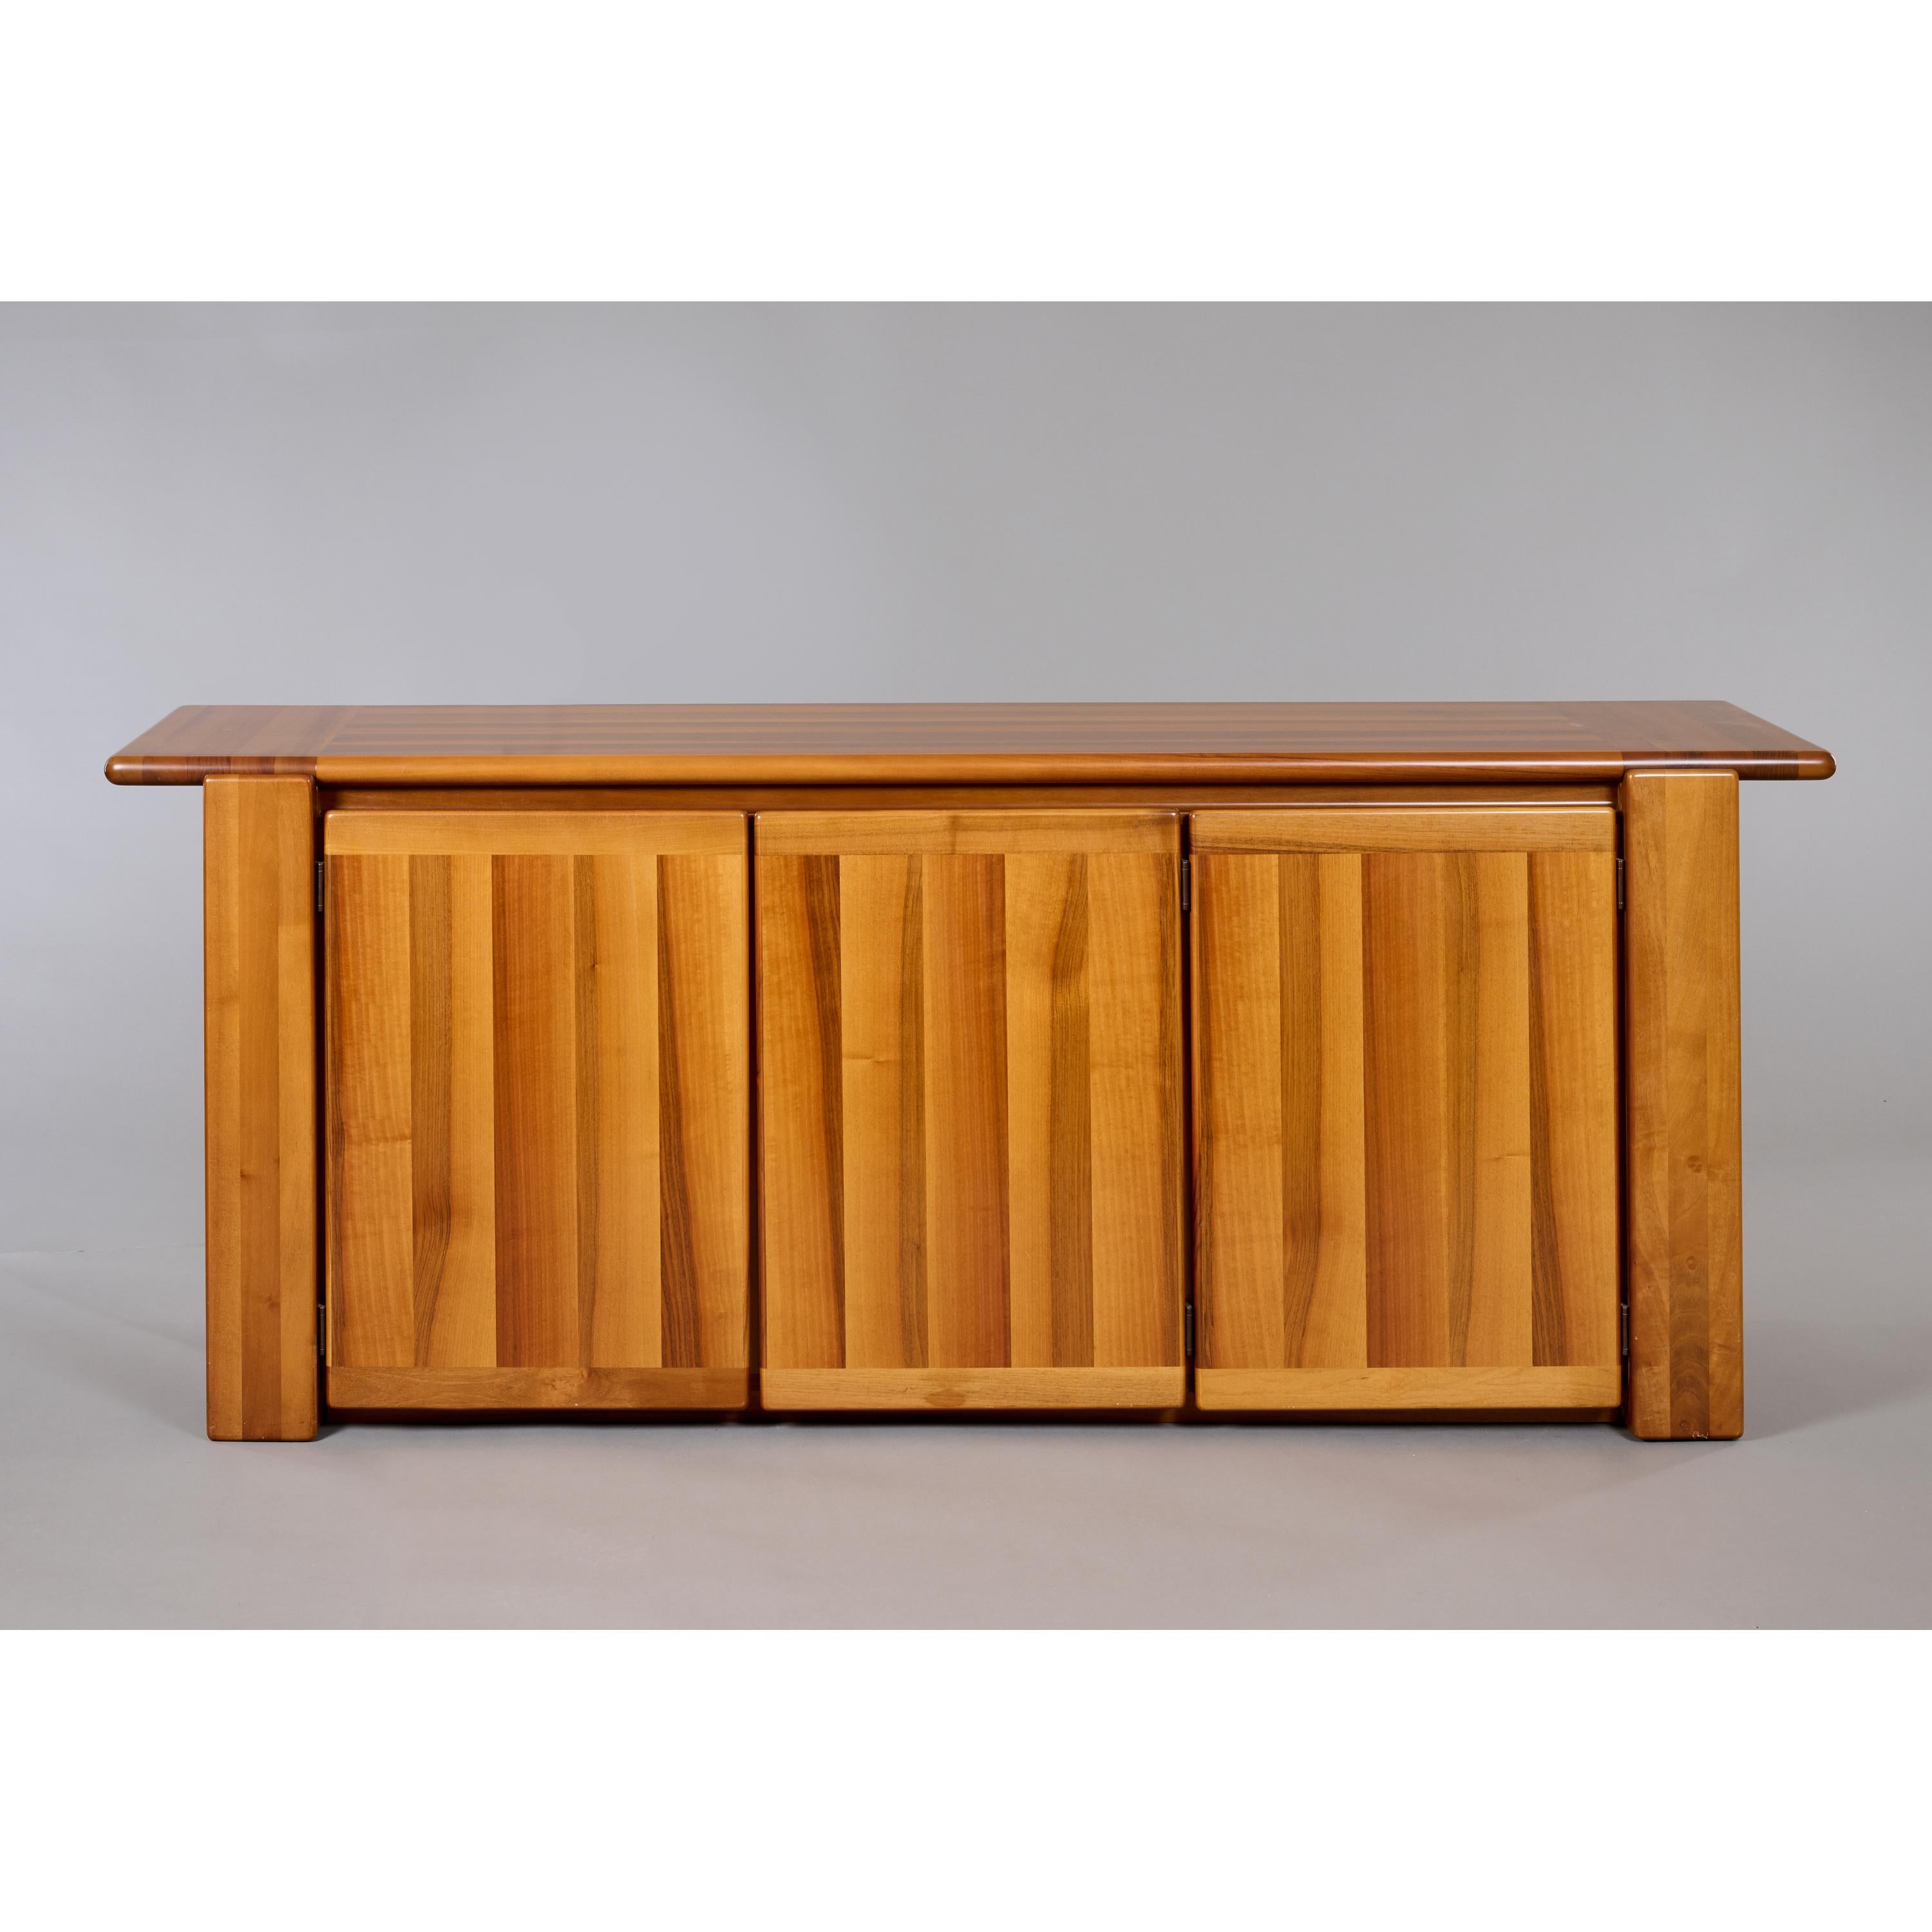 Italian Cabinet in Polished Walnut, Itso Pierre Chapo, Italy 1970s For Sale 1